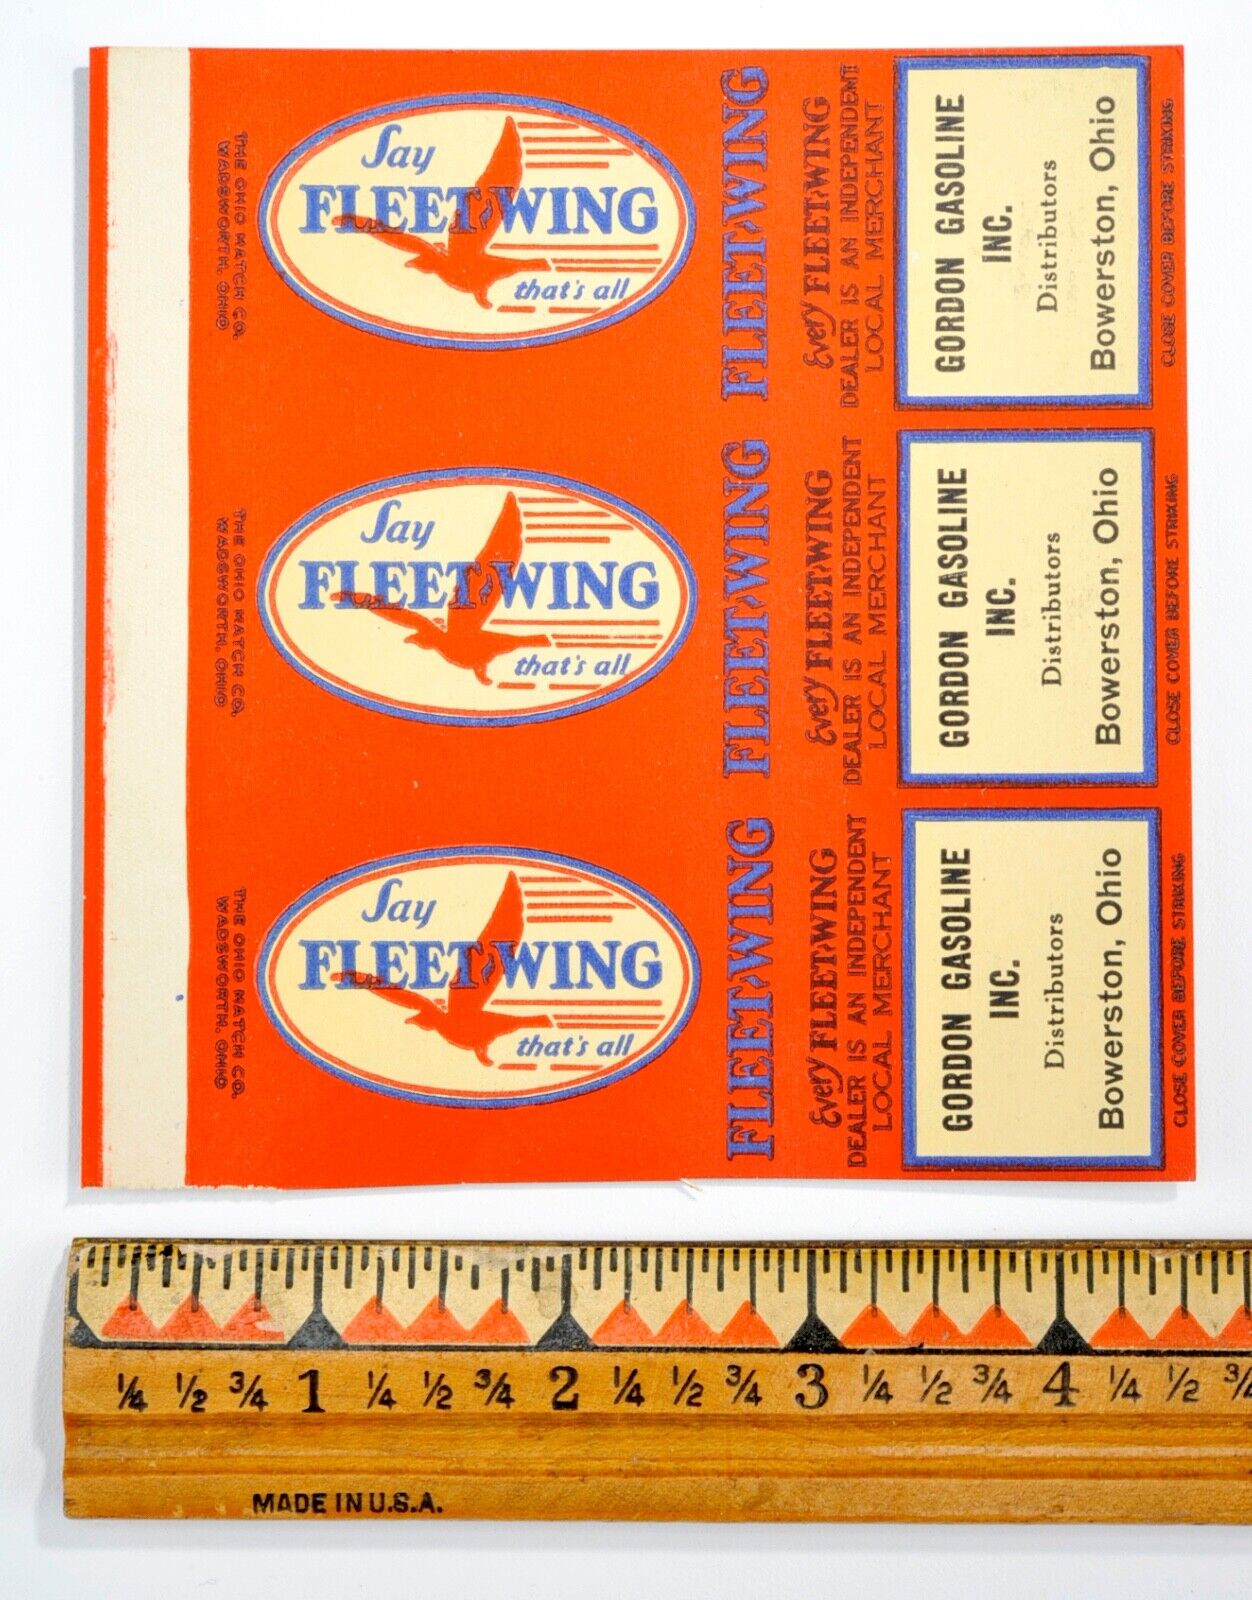 Vintage 1930\'s Say Fleet Wing Oil Advertising Matchbook Cover Bowerston, Ohio#20